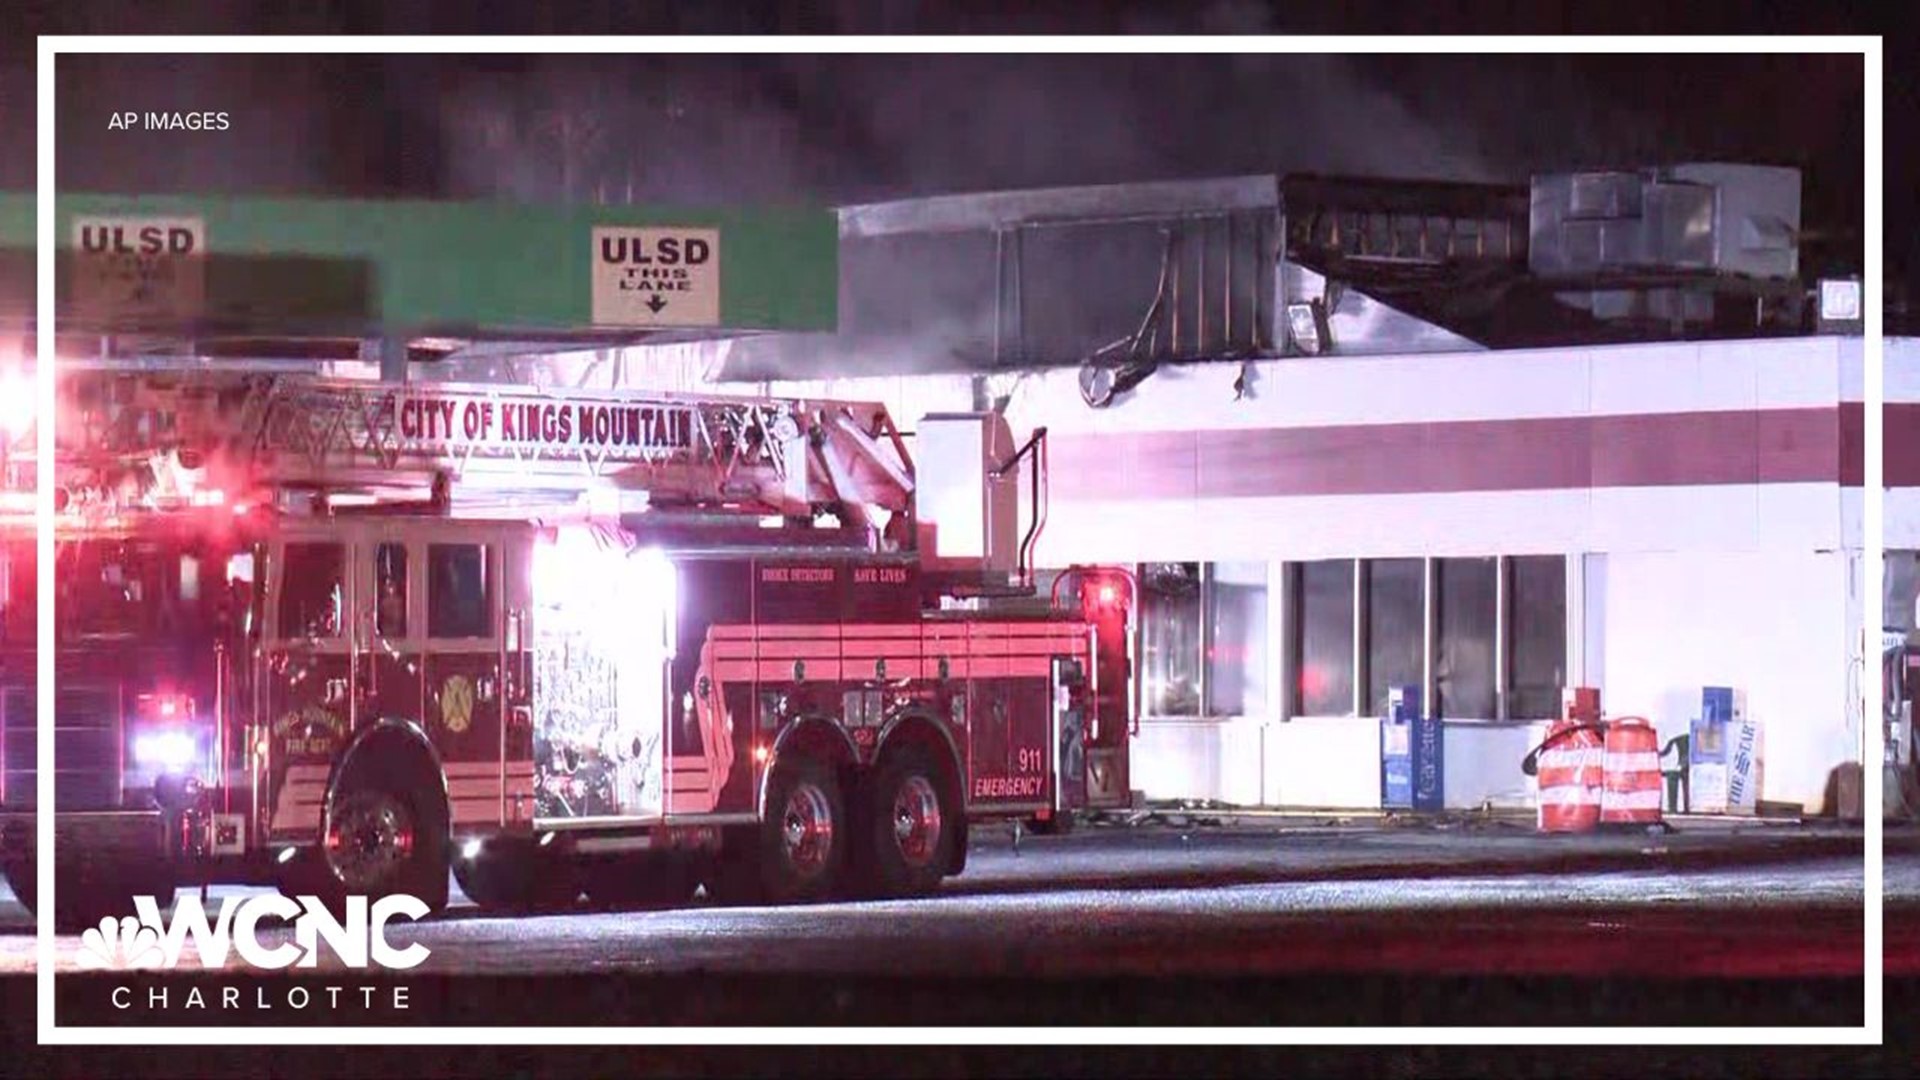 A firefighter was hurt after a fire at a truck stop in Kings Mountain, according to the Kings Mountain Fire Department.